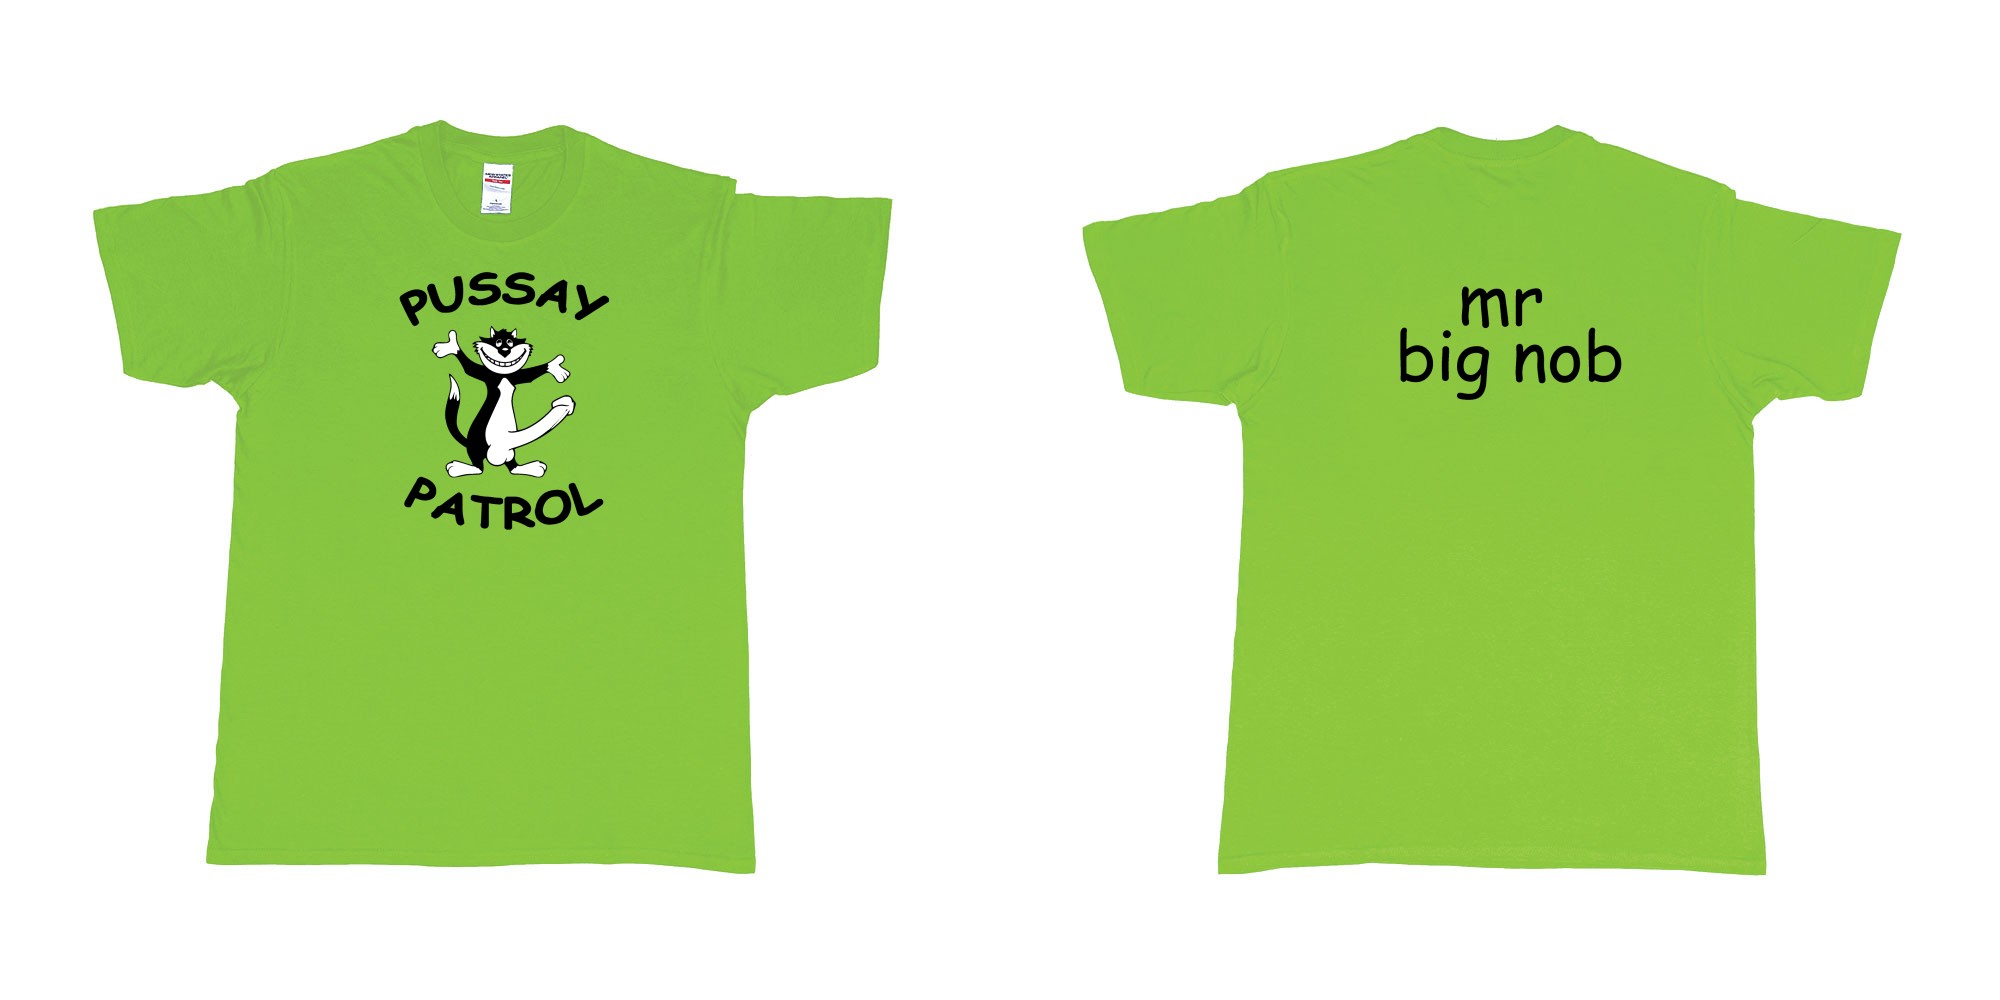 Custom tshirt design TPW Pussay Patrol in fabric color lime choice your own text made in Bali by The Pirate Way